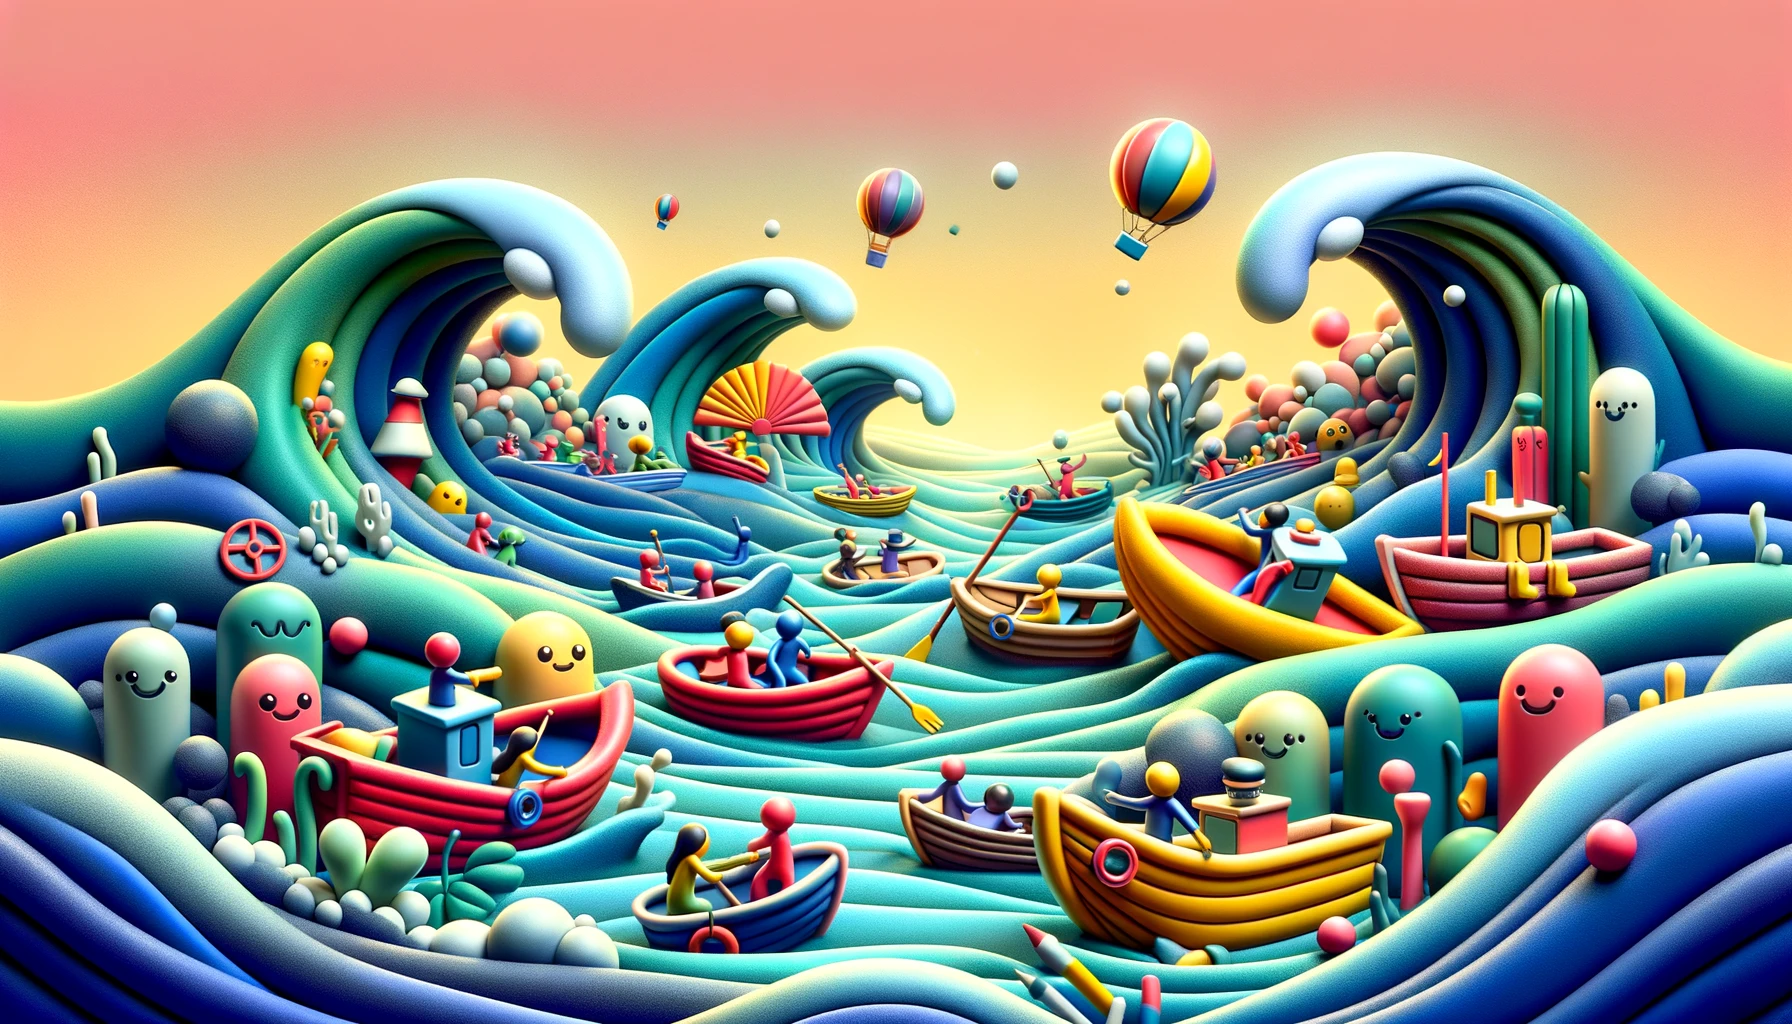 A dreamy depiction of a rising tide, lifting all boats